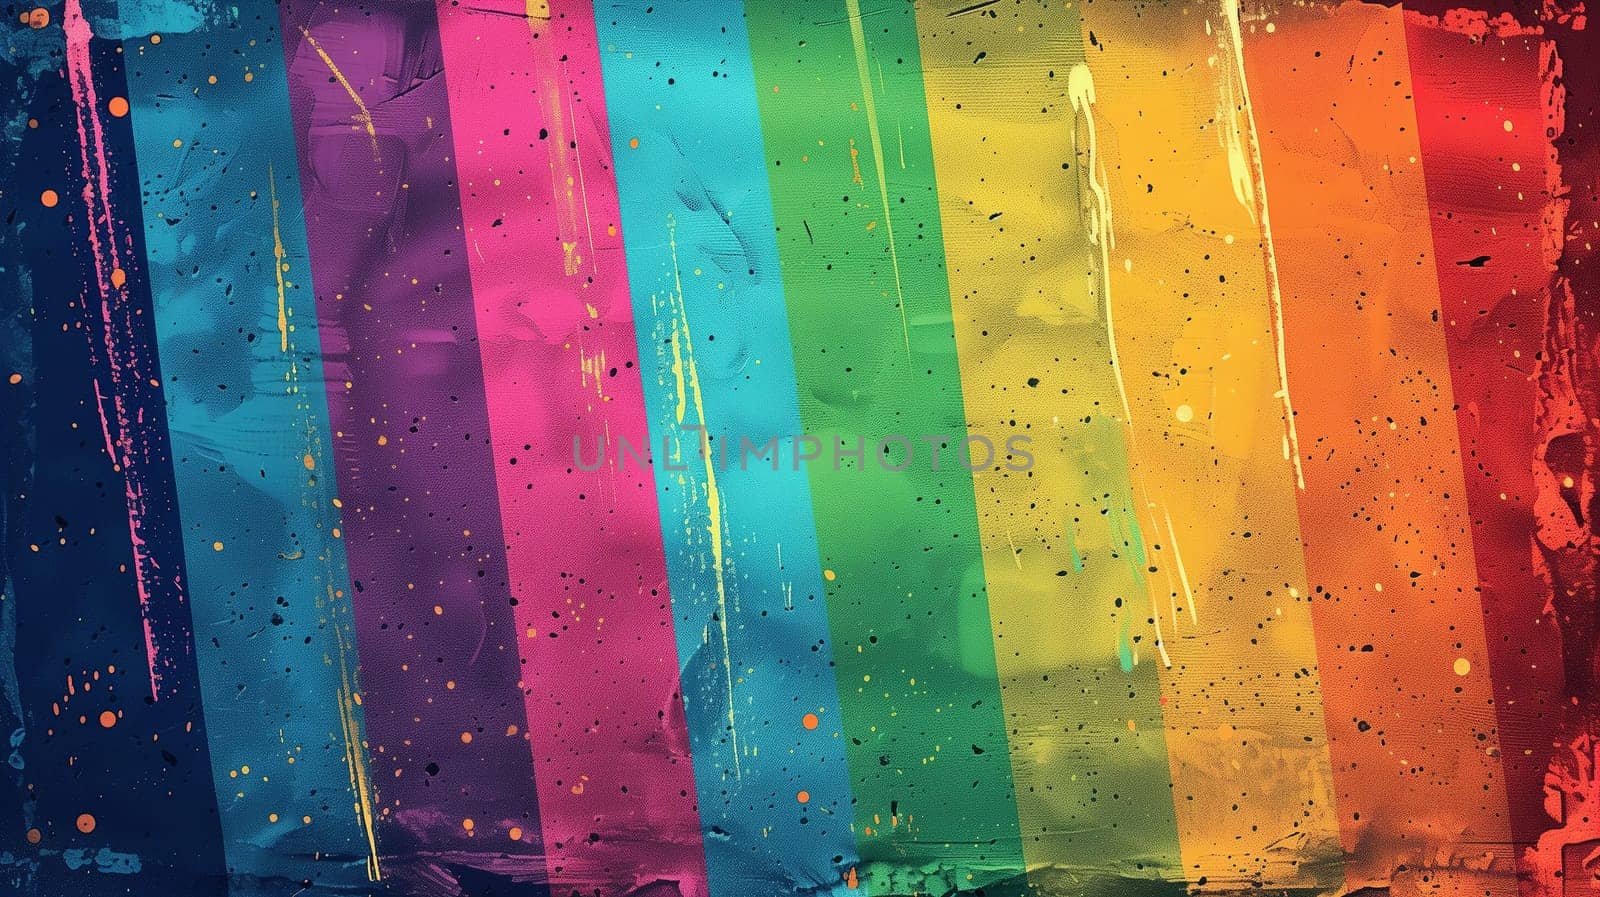 A canvas displays a series of bold vertical paint streaks in the colors of the rainbow, symbolizing LGBT pride. The vivid hues are dripping and blending into one another, with speckles of paint adding to the dynamic texture of the artwork.